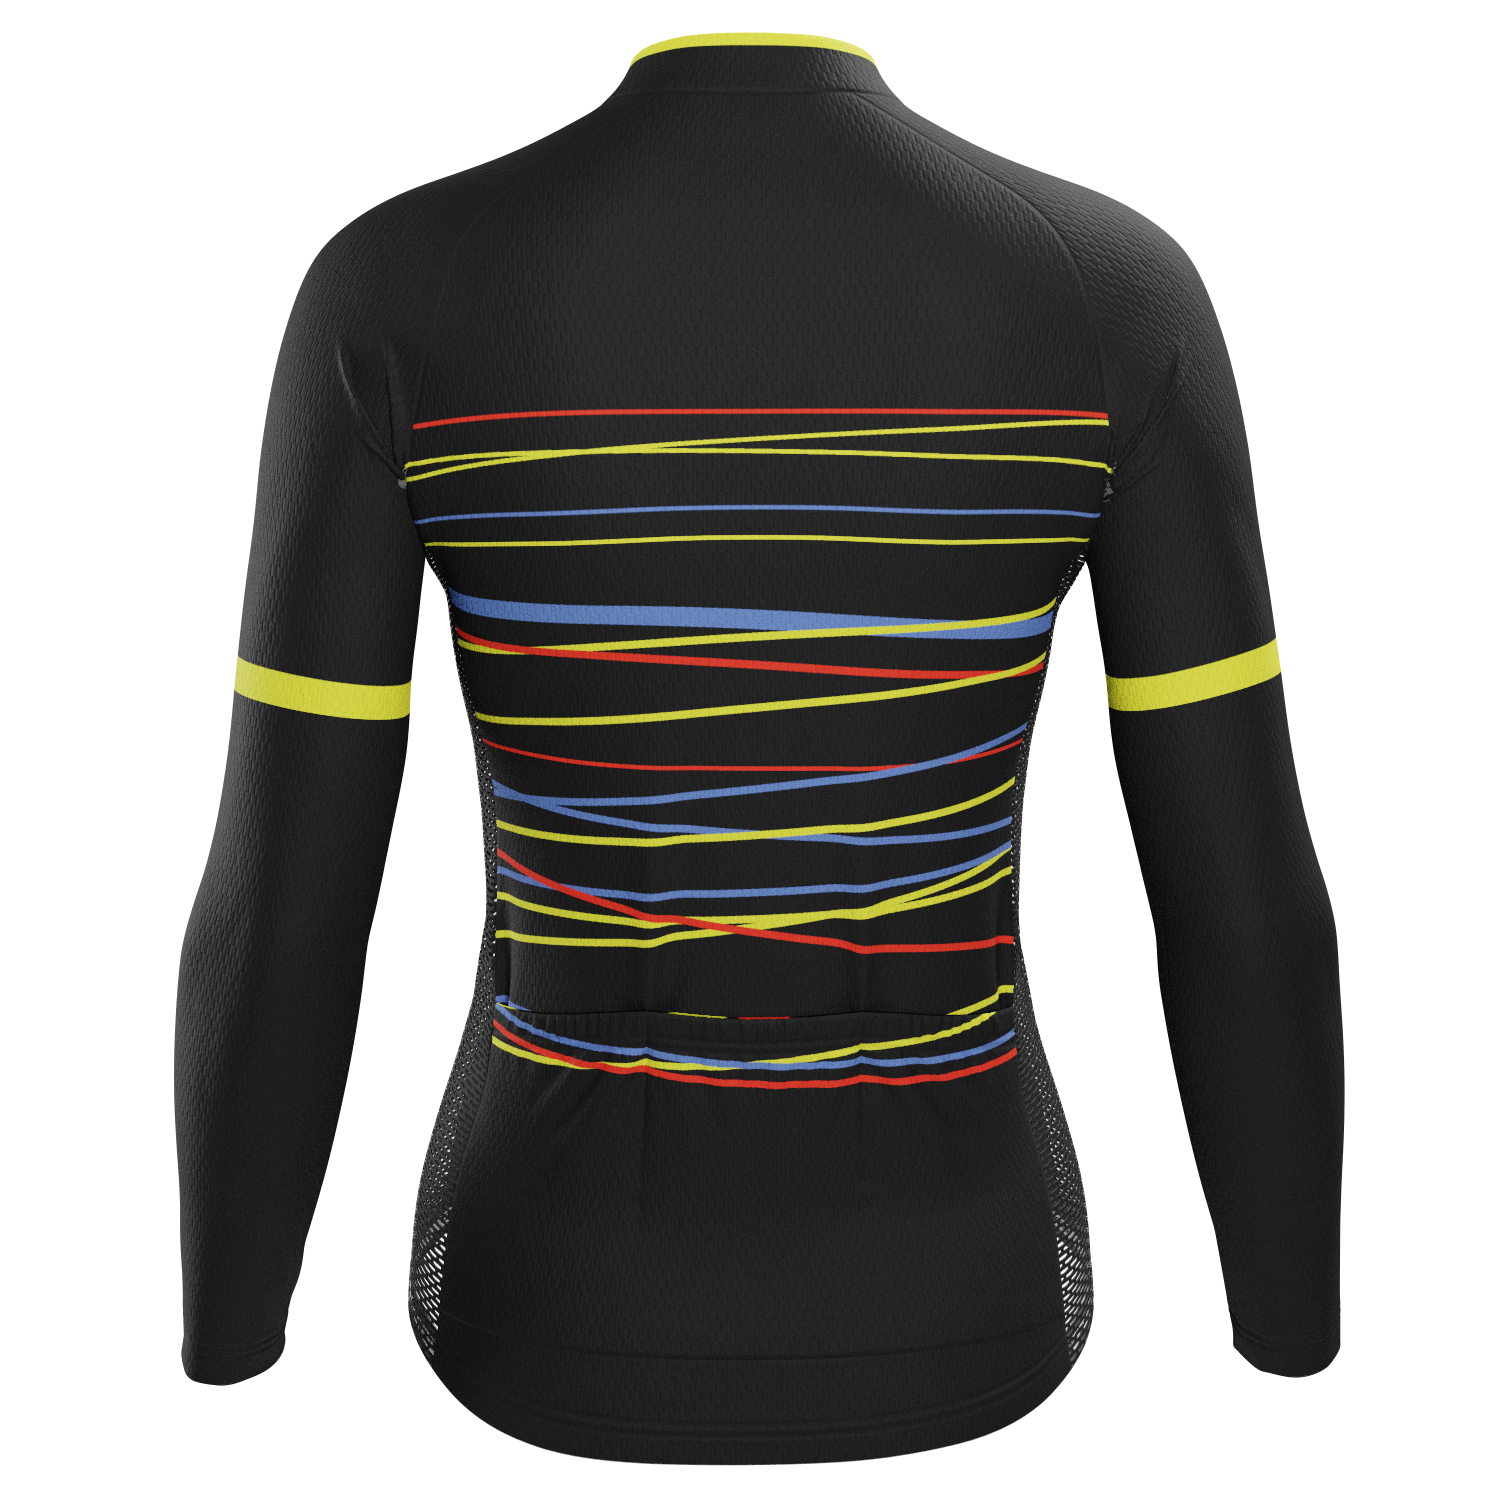 Women's Zigzag Color Lines Long Sleeve Cycling Jersey